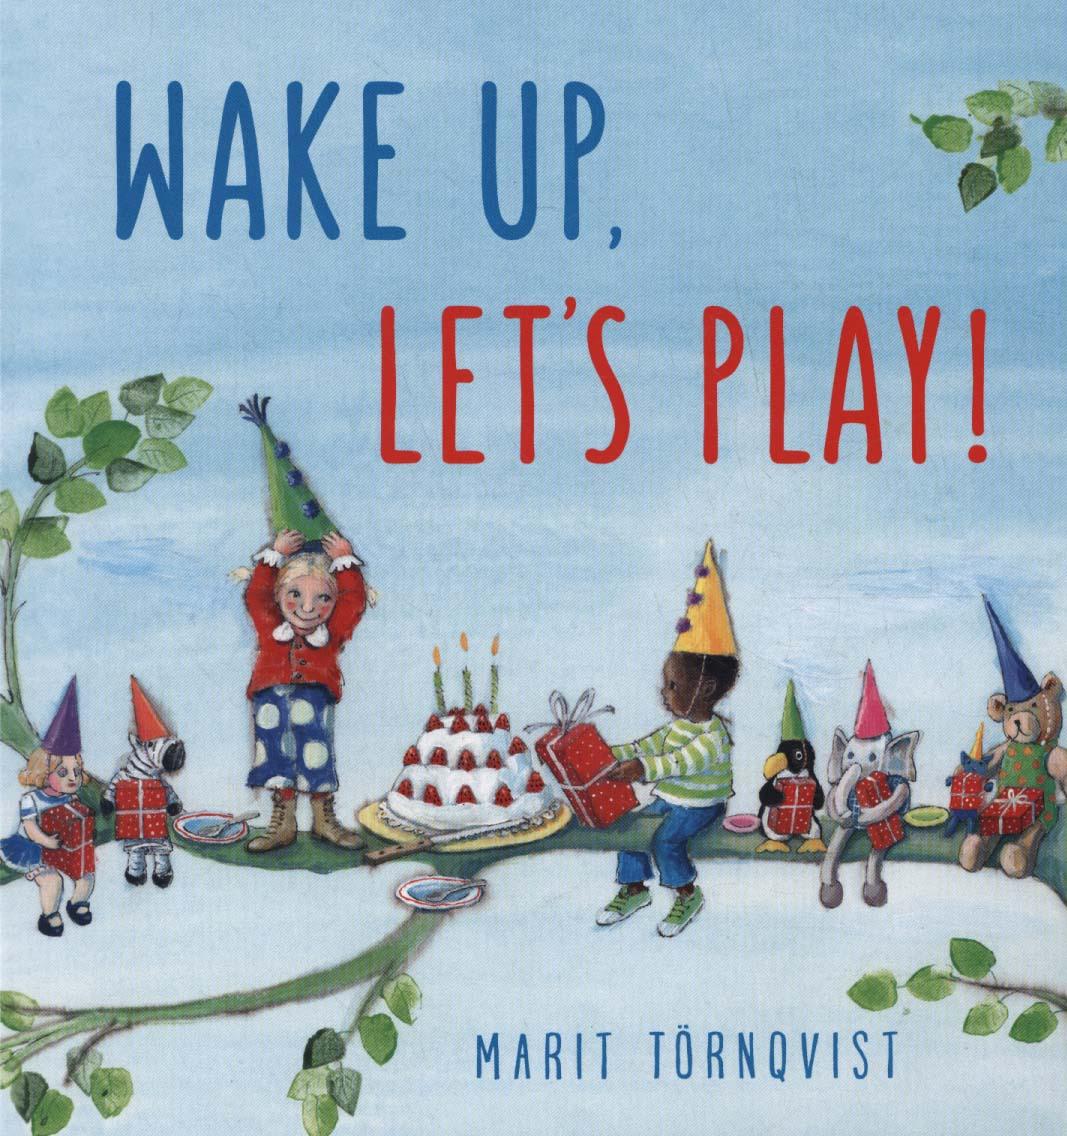 Wake Up, Let's Play! - Marit Tornqvist